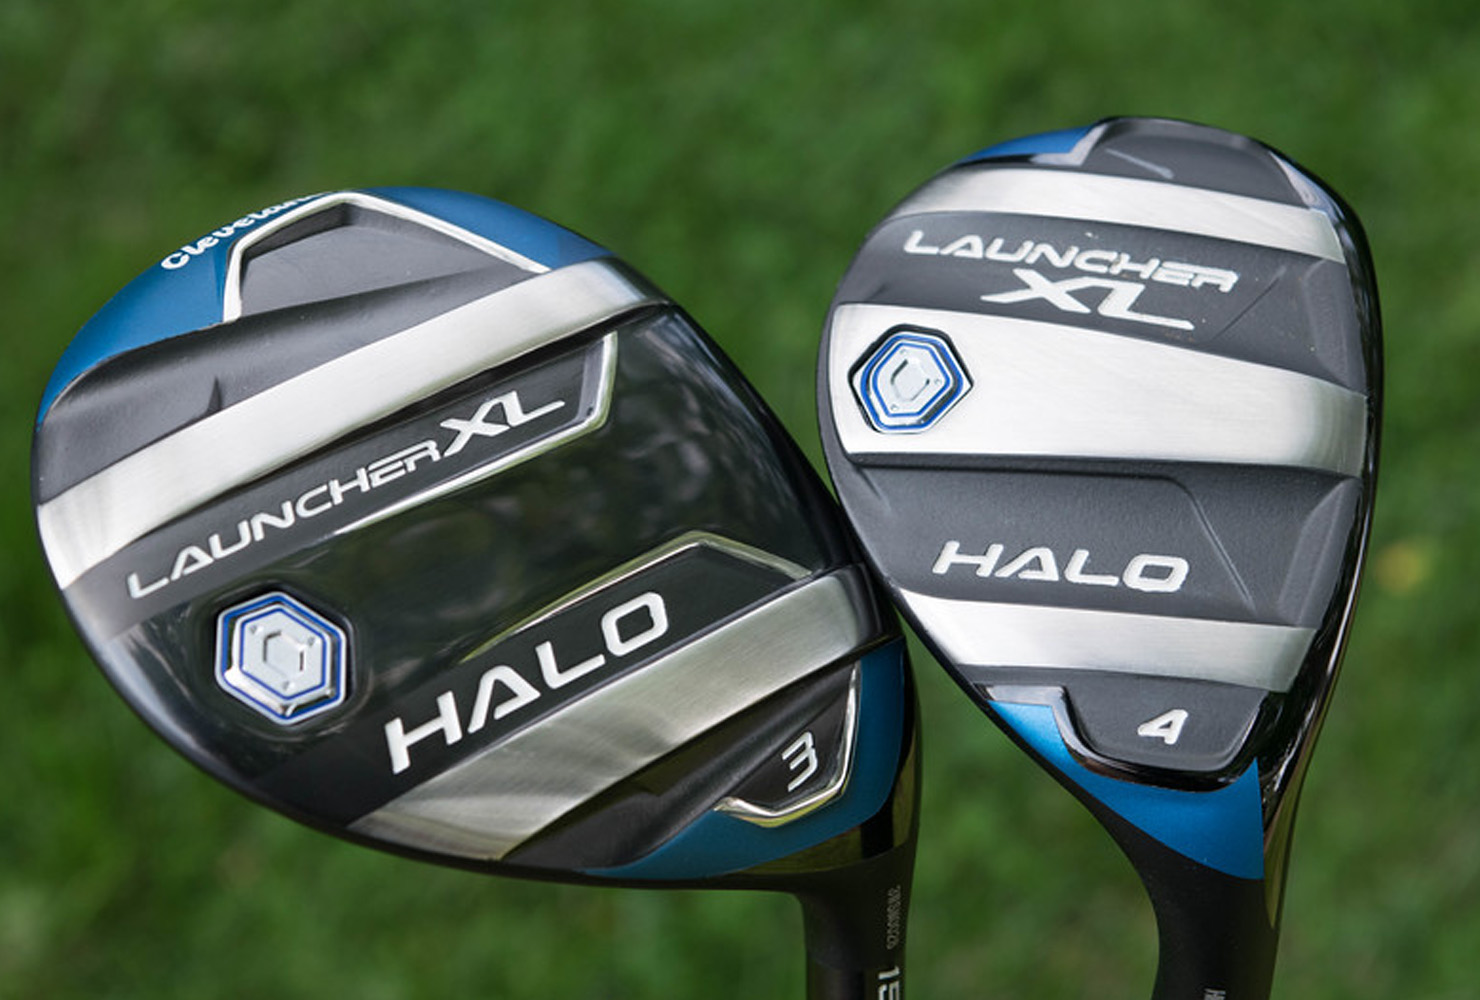 Cleveland Launcher XL Halo FW Woods and Hybrid Preview - The 